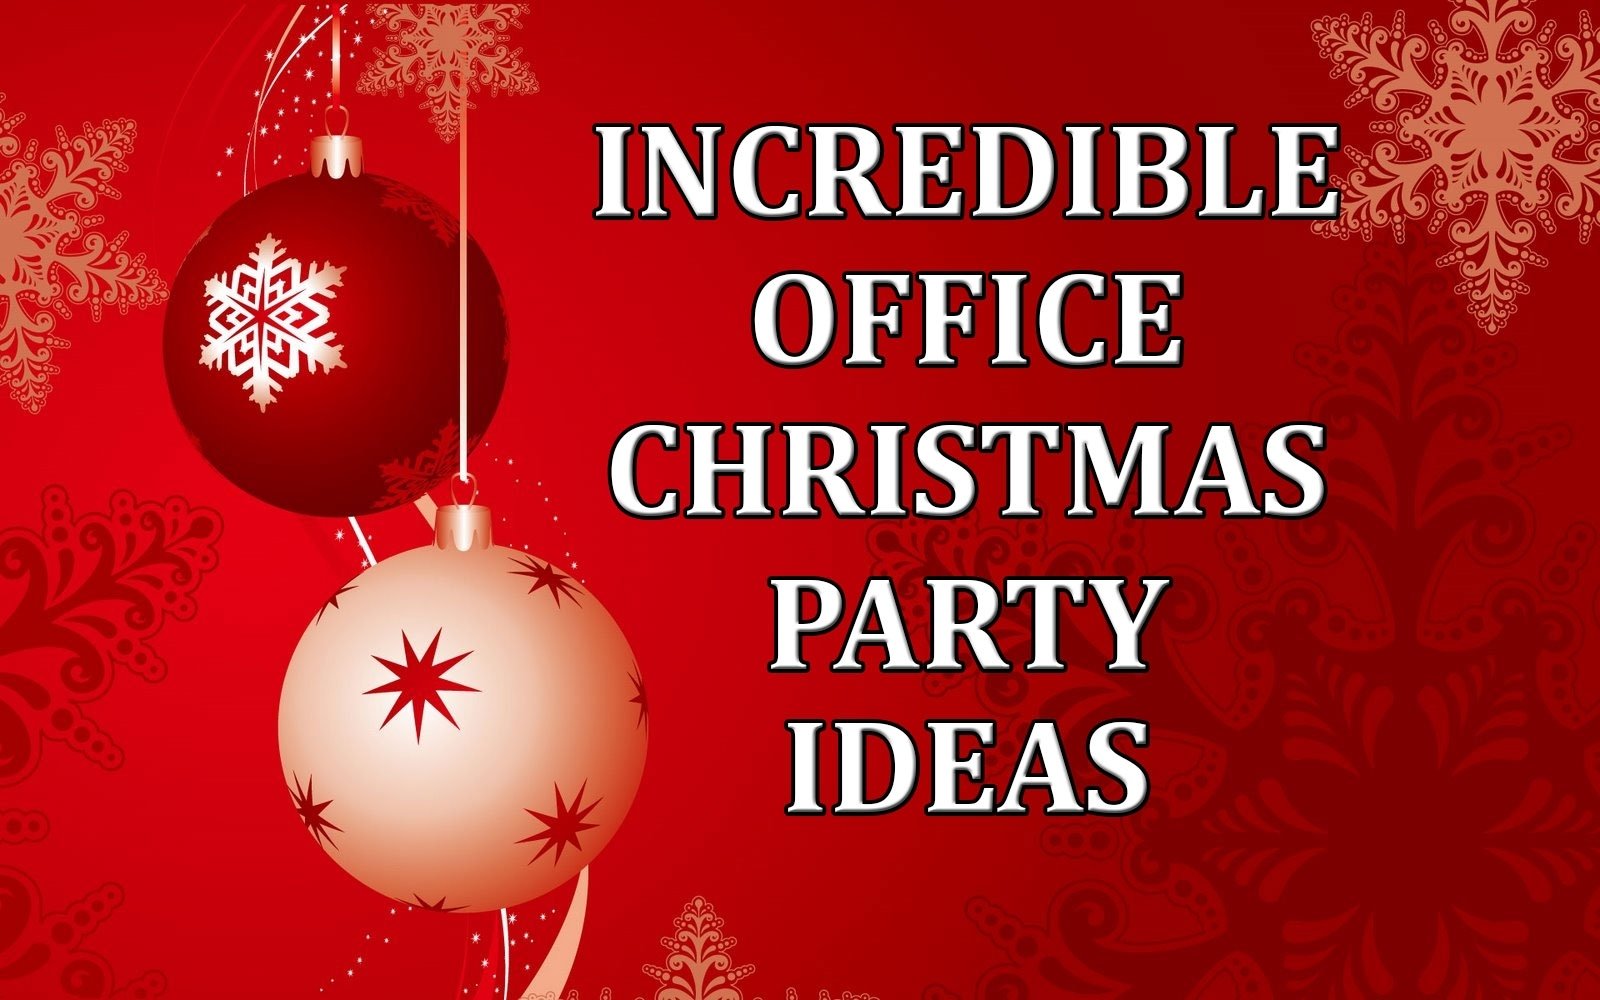 10 Attractive Corporate Holiday Party Entertainment Ideas incredible office christmas party ideas comedy ventriloquist 2 2022